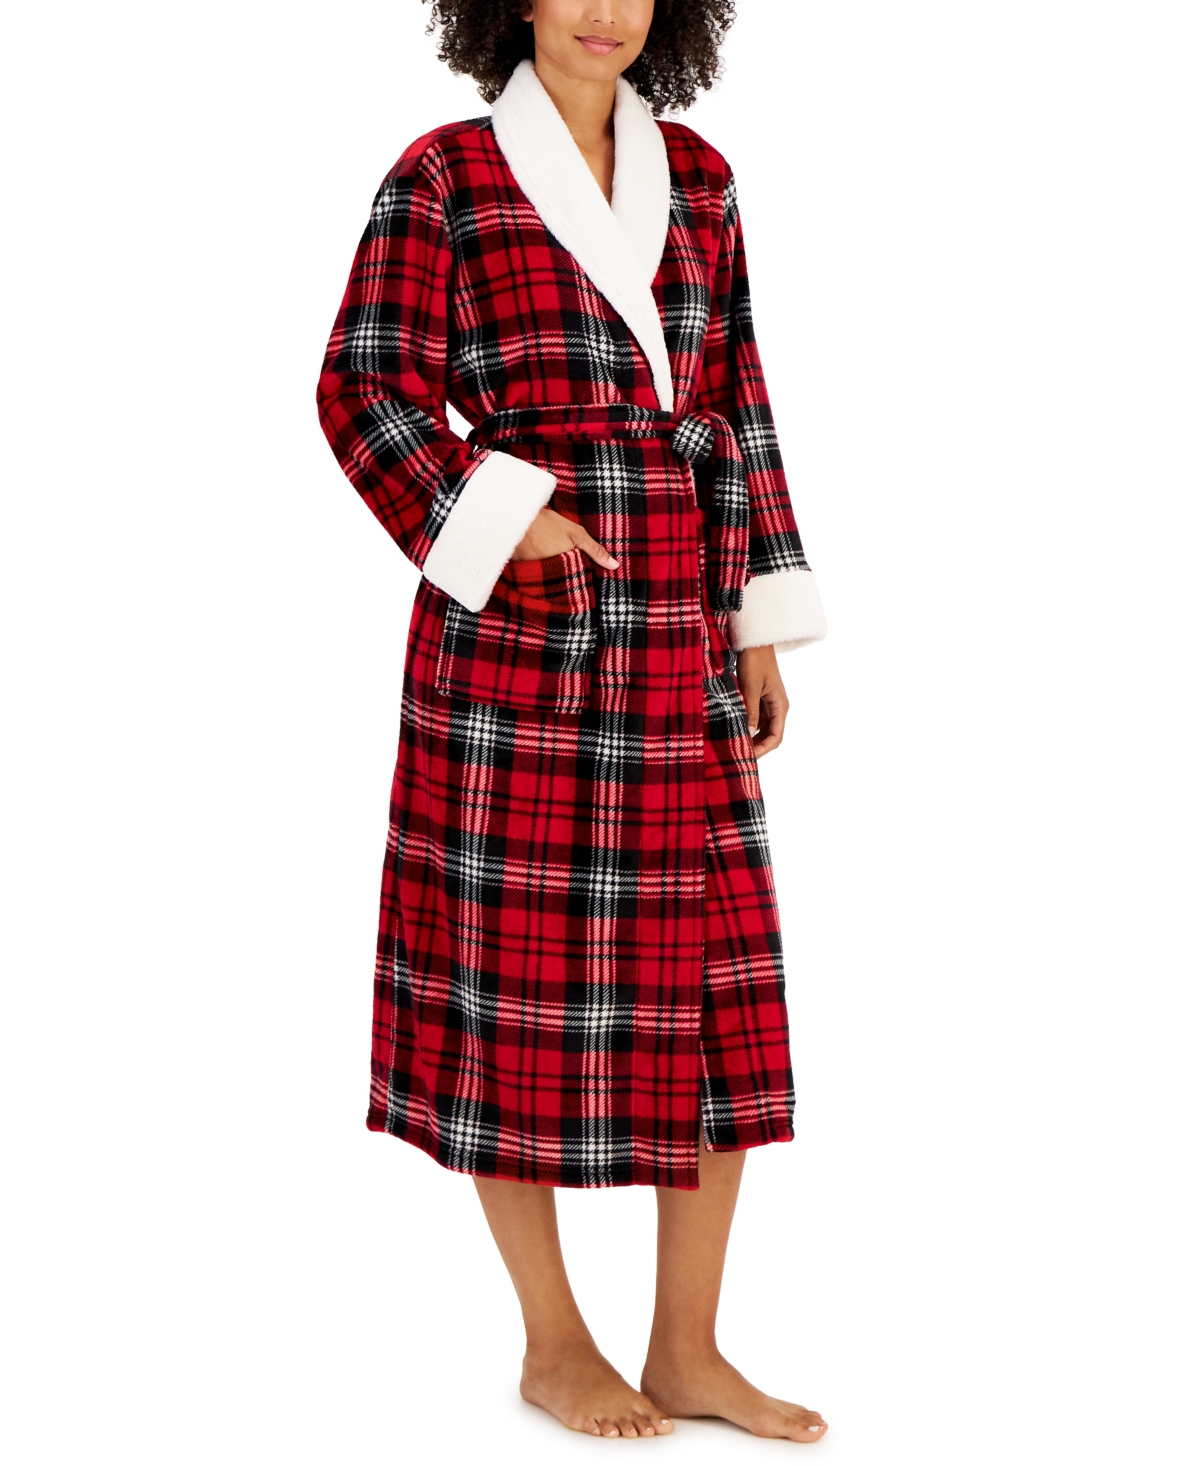 Women's Long-Sleeve Plaid Self-Tie Robe, Created for Macy's - Pink Plaid